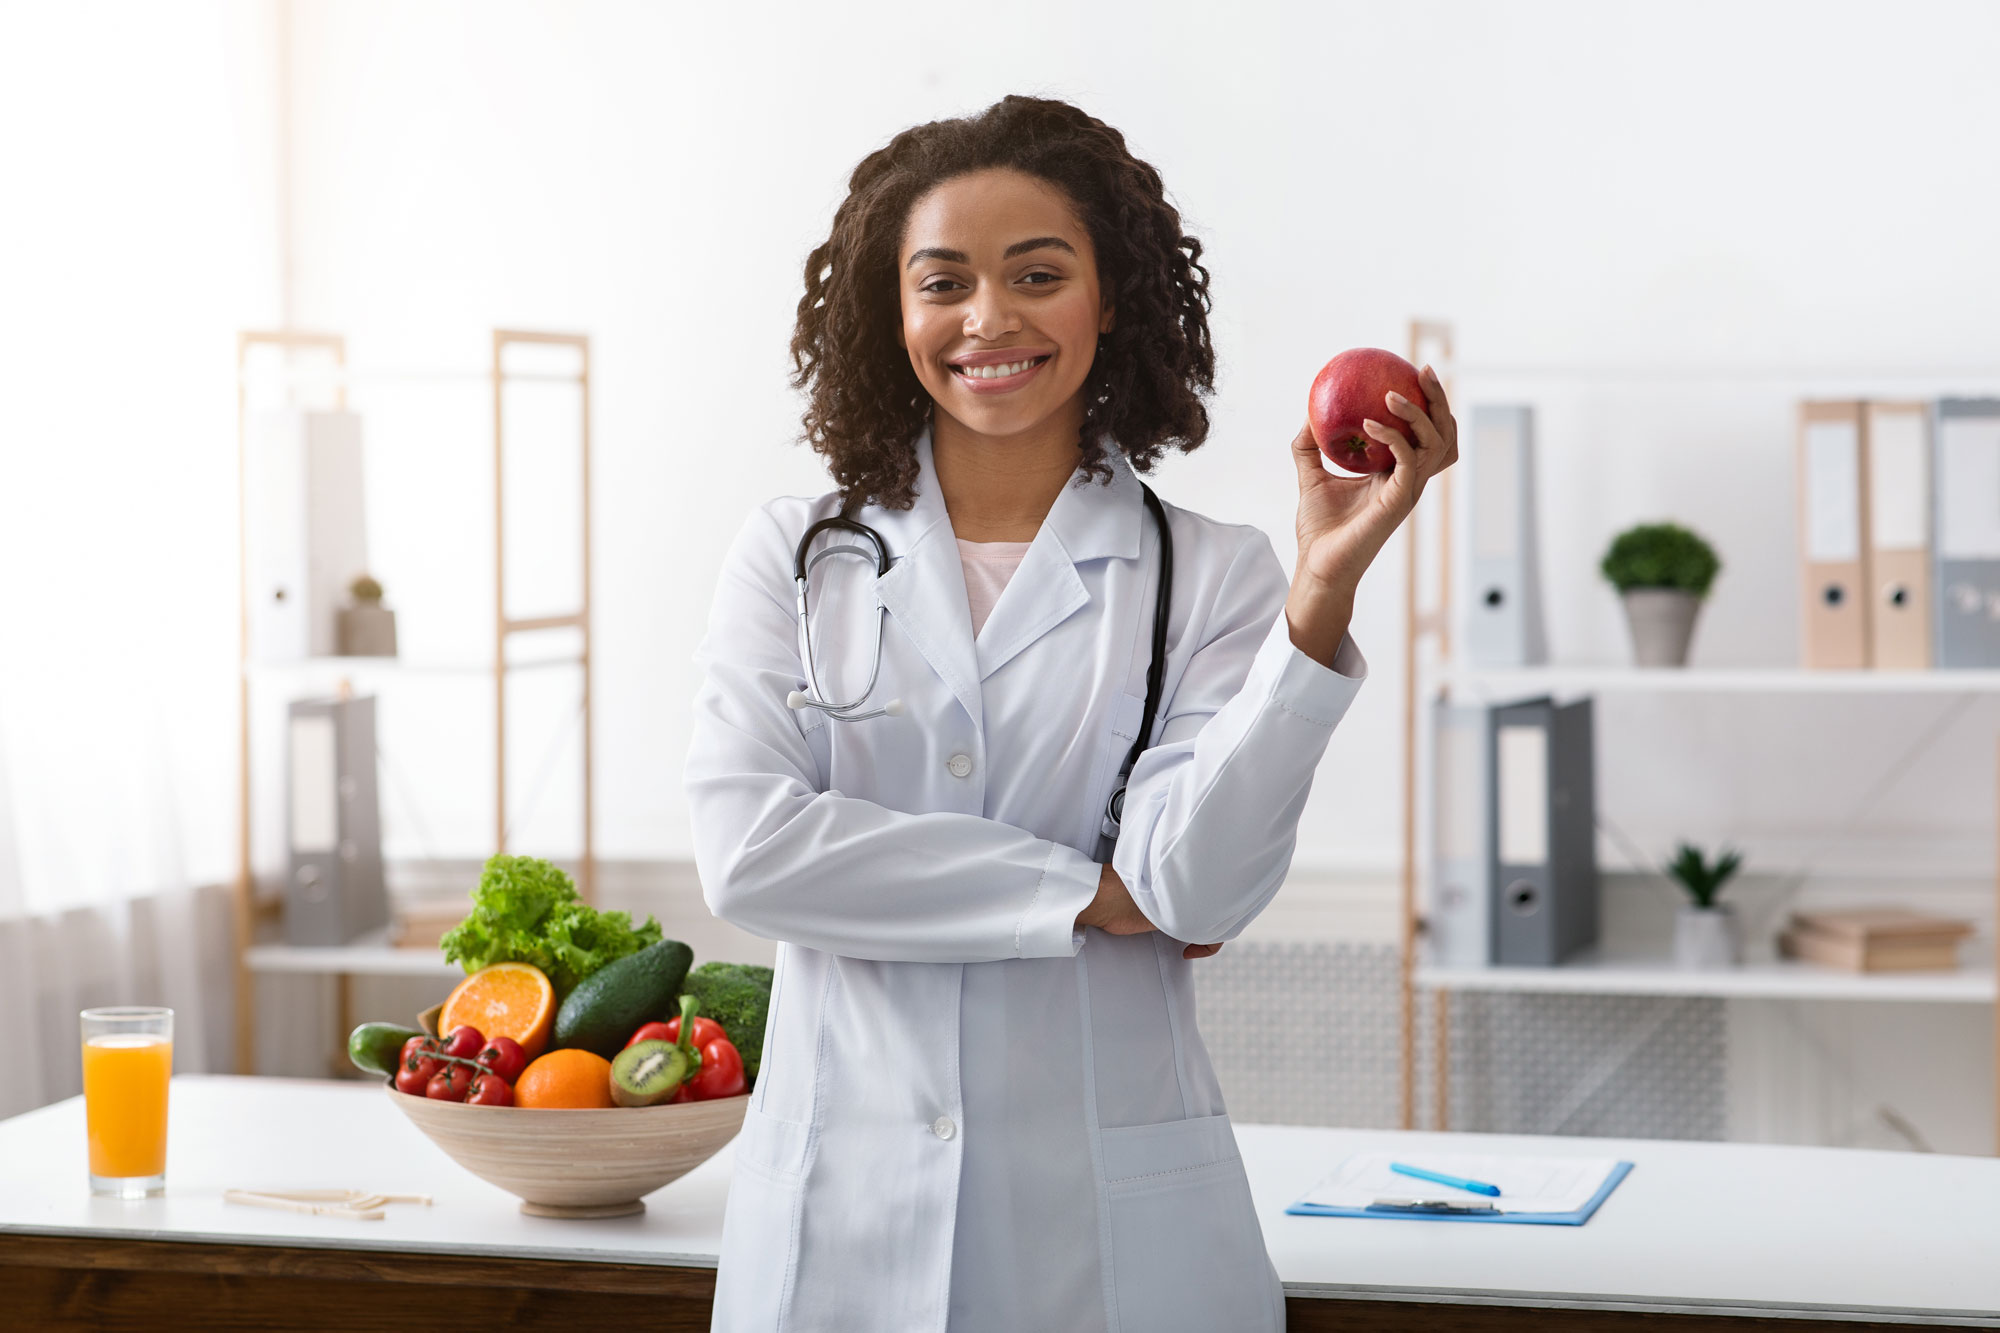 A dietitian smiling with an apple